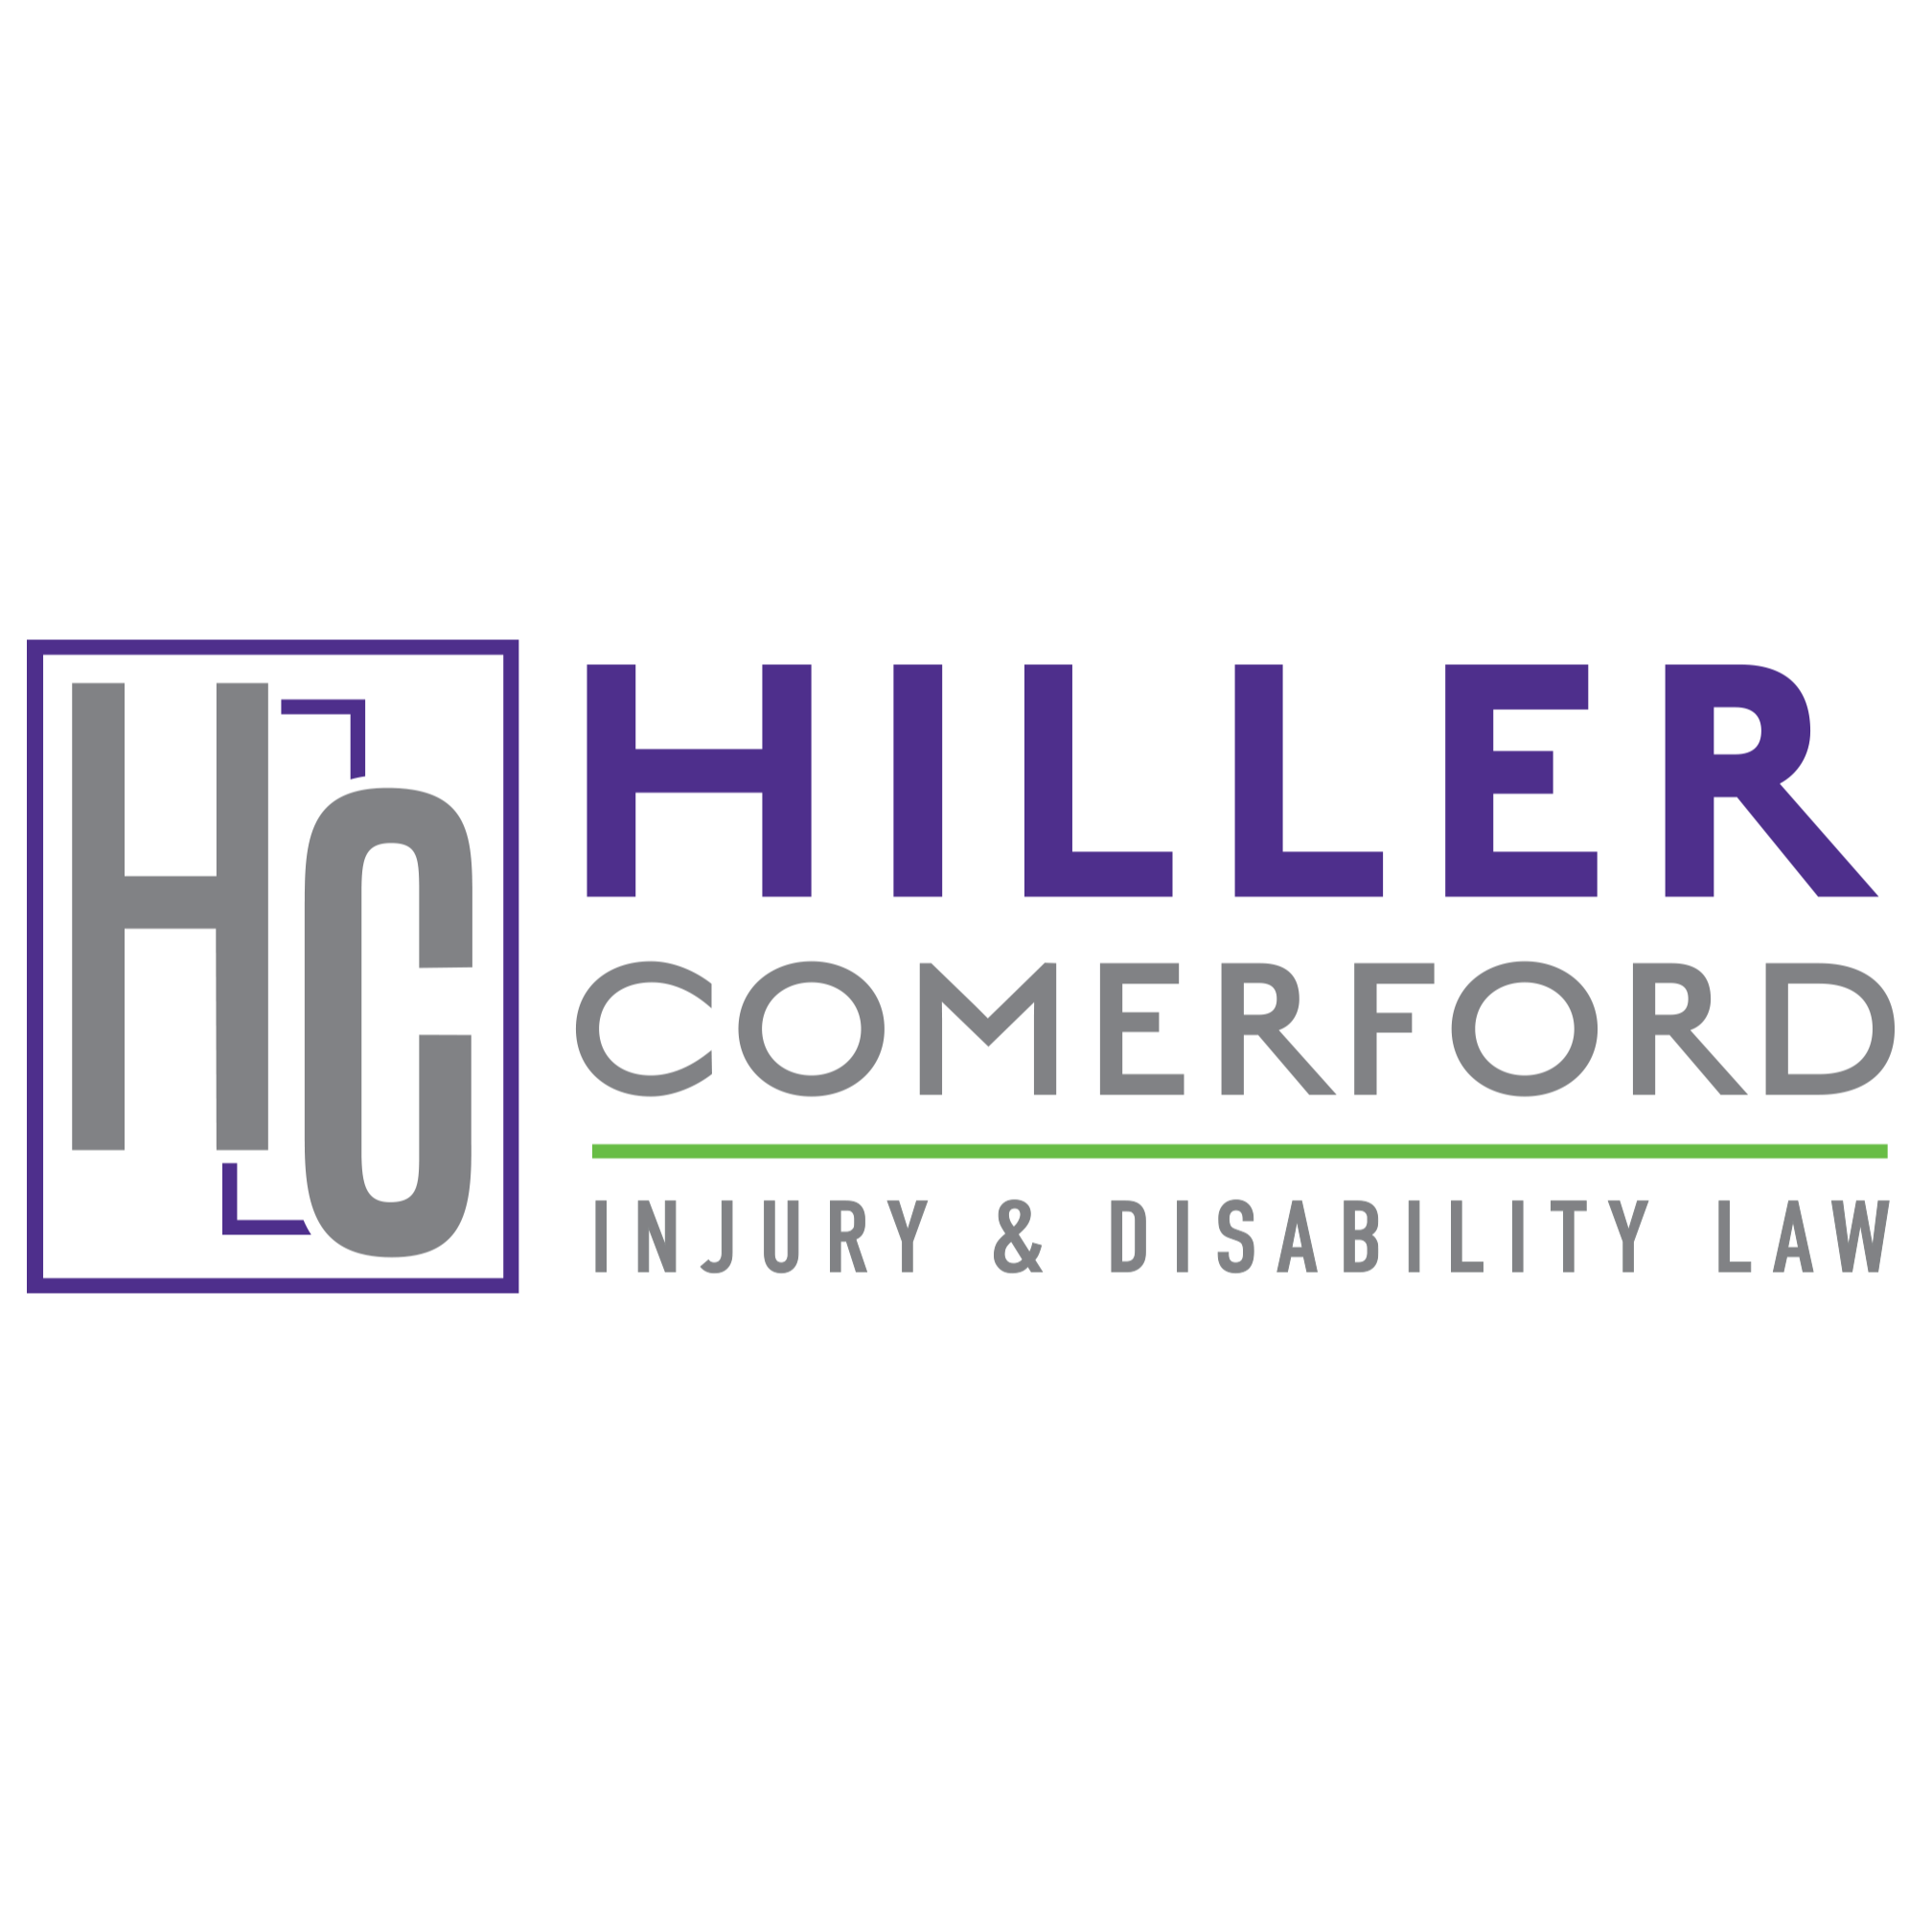 Hiller Comerford Injury & Disability Law - Amherst, NY 14228 - (866)445-5375 | ShowMeLocal.com